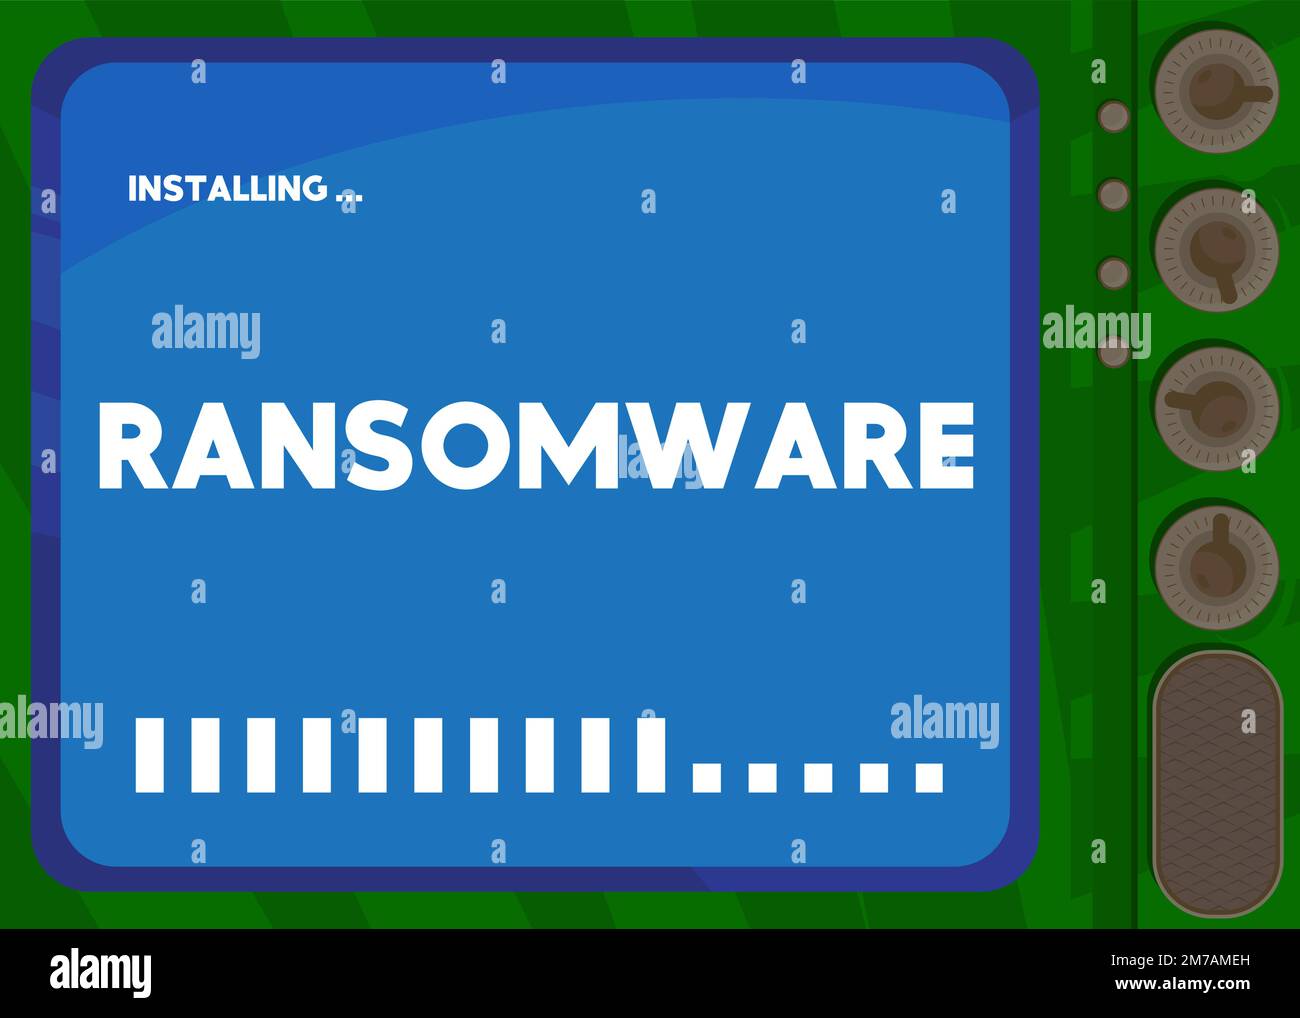 Cartoon Computer With the word Ransomware. Message of a screen displaying an installation window. Stock Vector